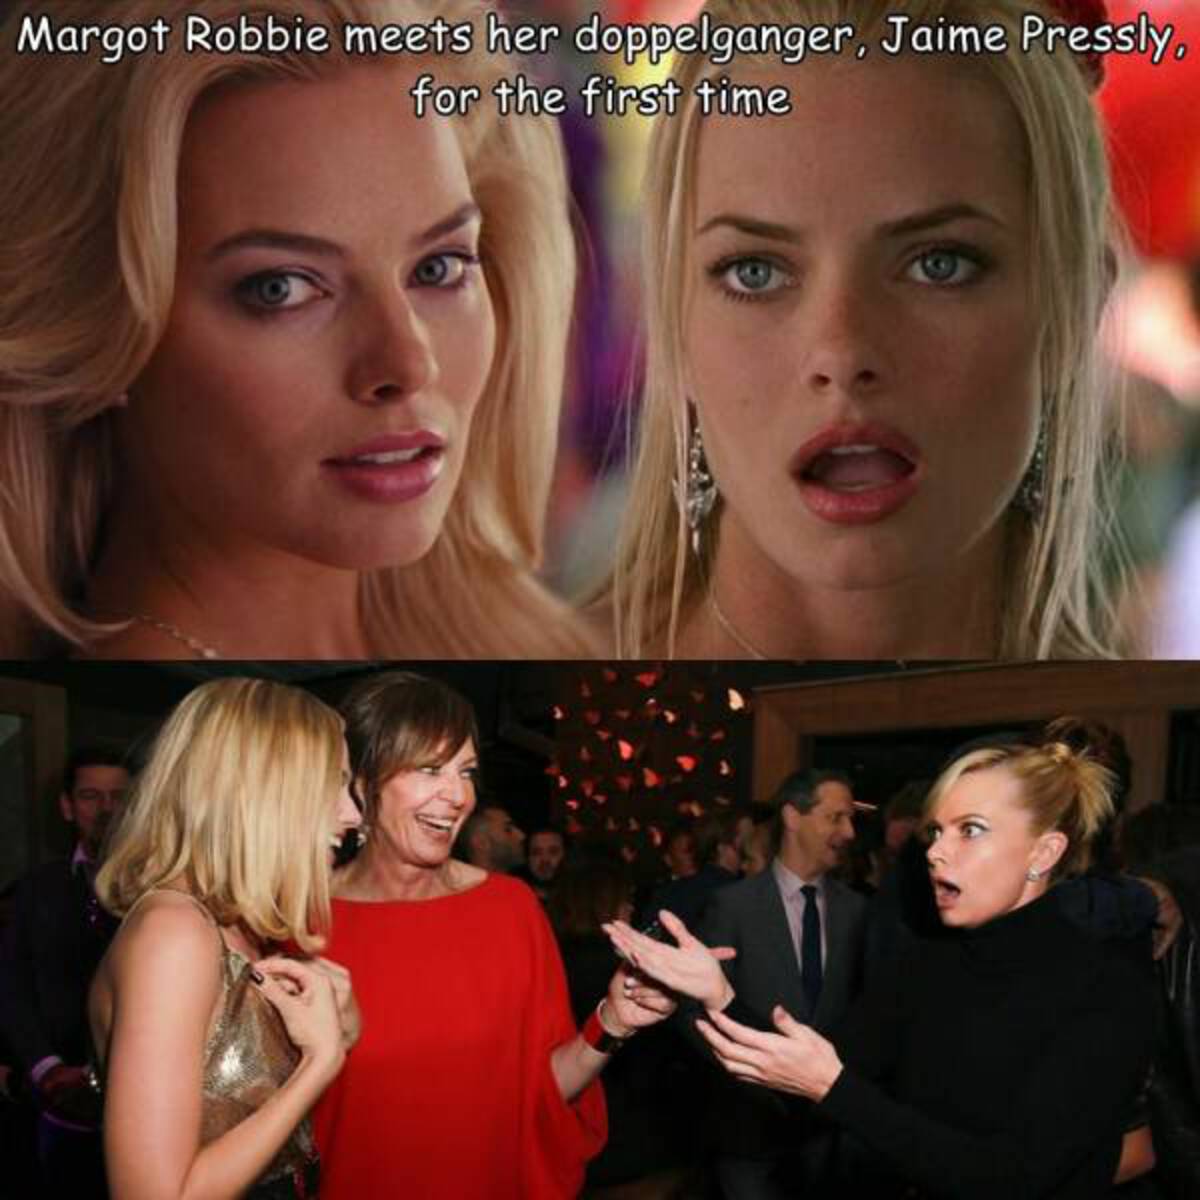 jaime pressly and margot robbie - Margot Robbie meets her doppelganger, Jaime Pressly, for the first time